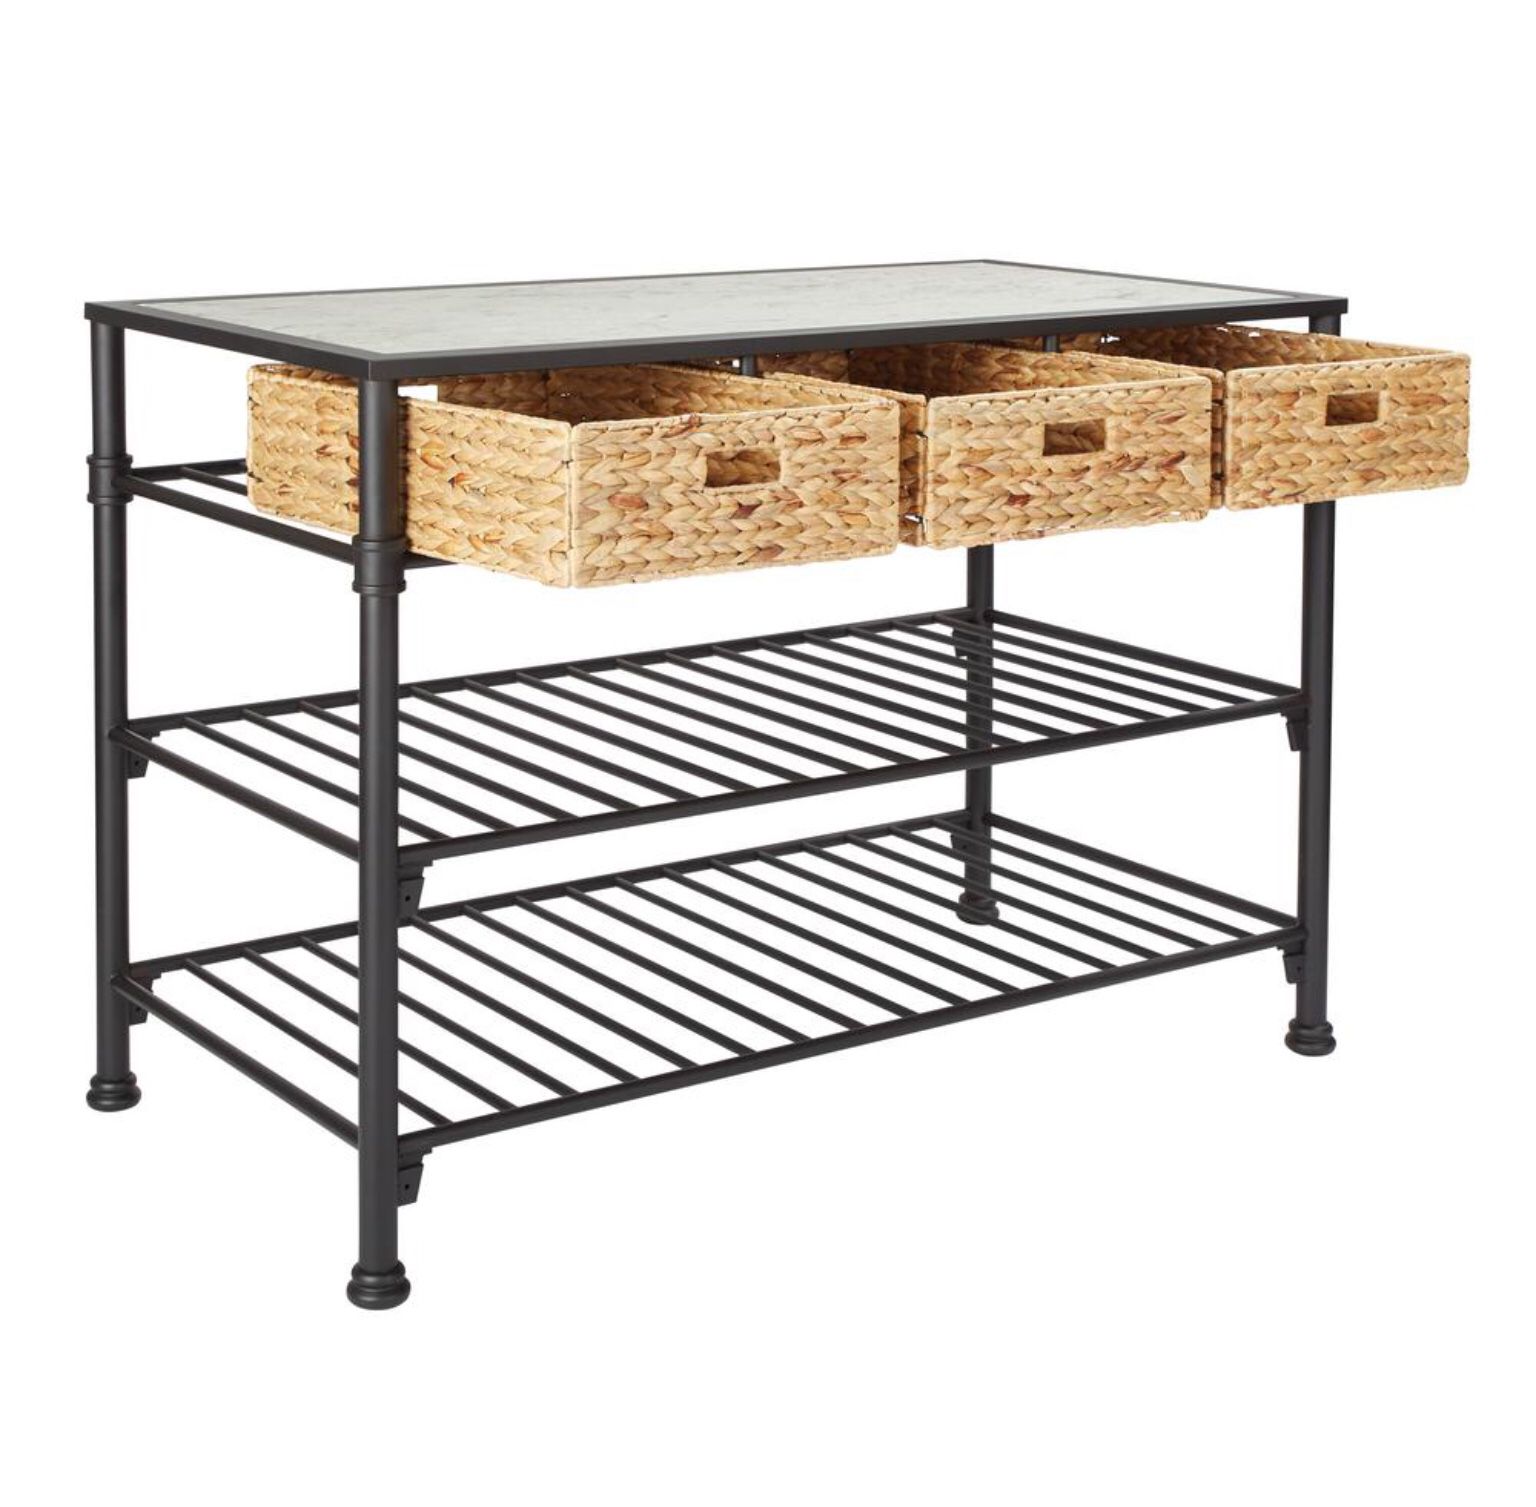 OSP Home Furnishings Paula Kitchen Island with Faux White Marble Top and Black Frame with Natural Woven Baskets, No Tools